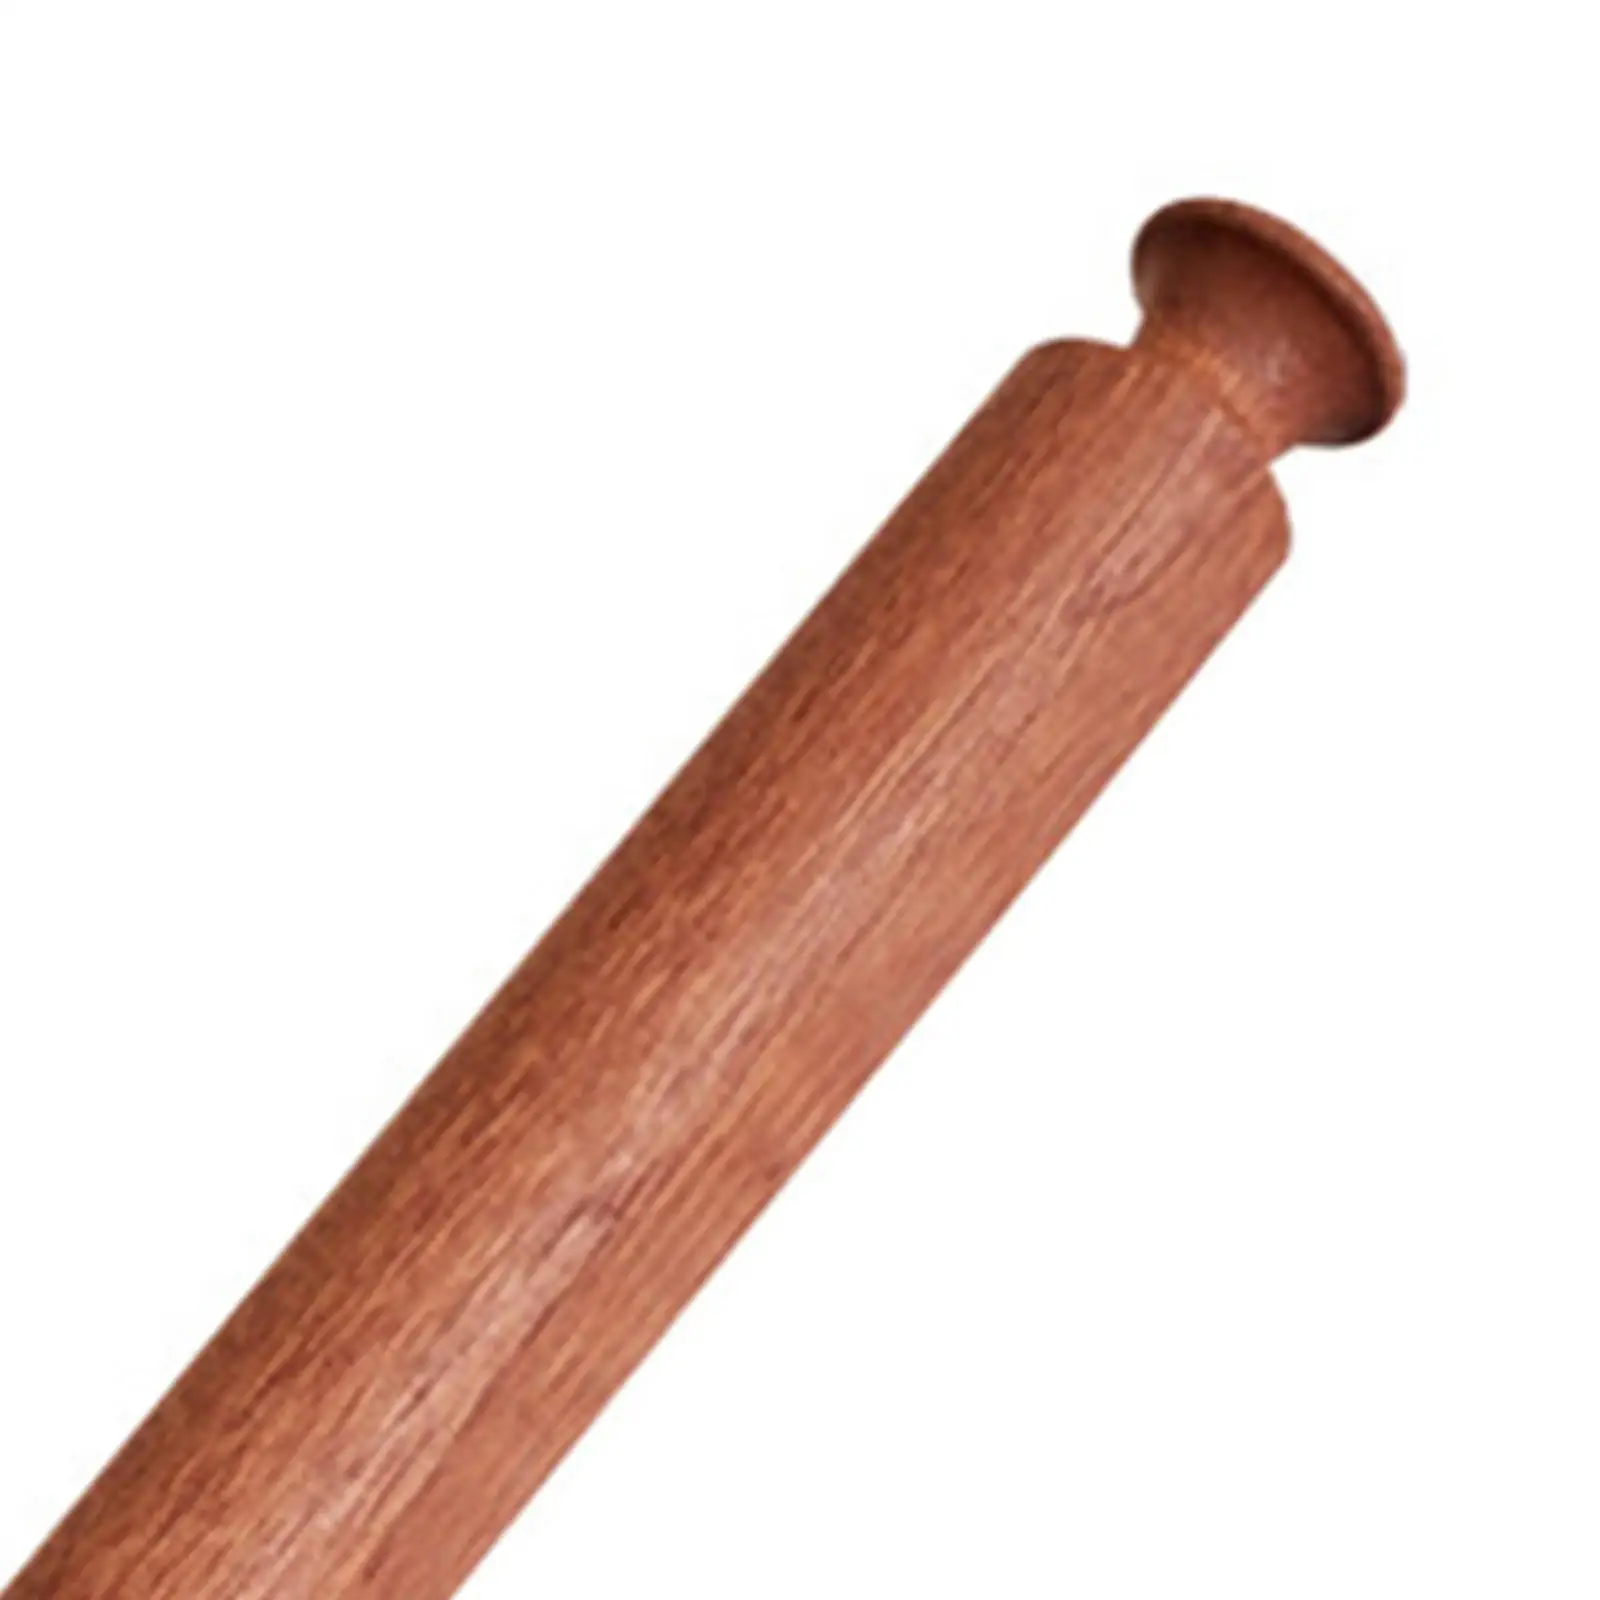 Rolling Pin for Dough Wooden Non Stick Handheld Baking Rolling Pin for Pizza Pie Biscuit Dumpling Making Pastry Kitchen Utensils